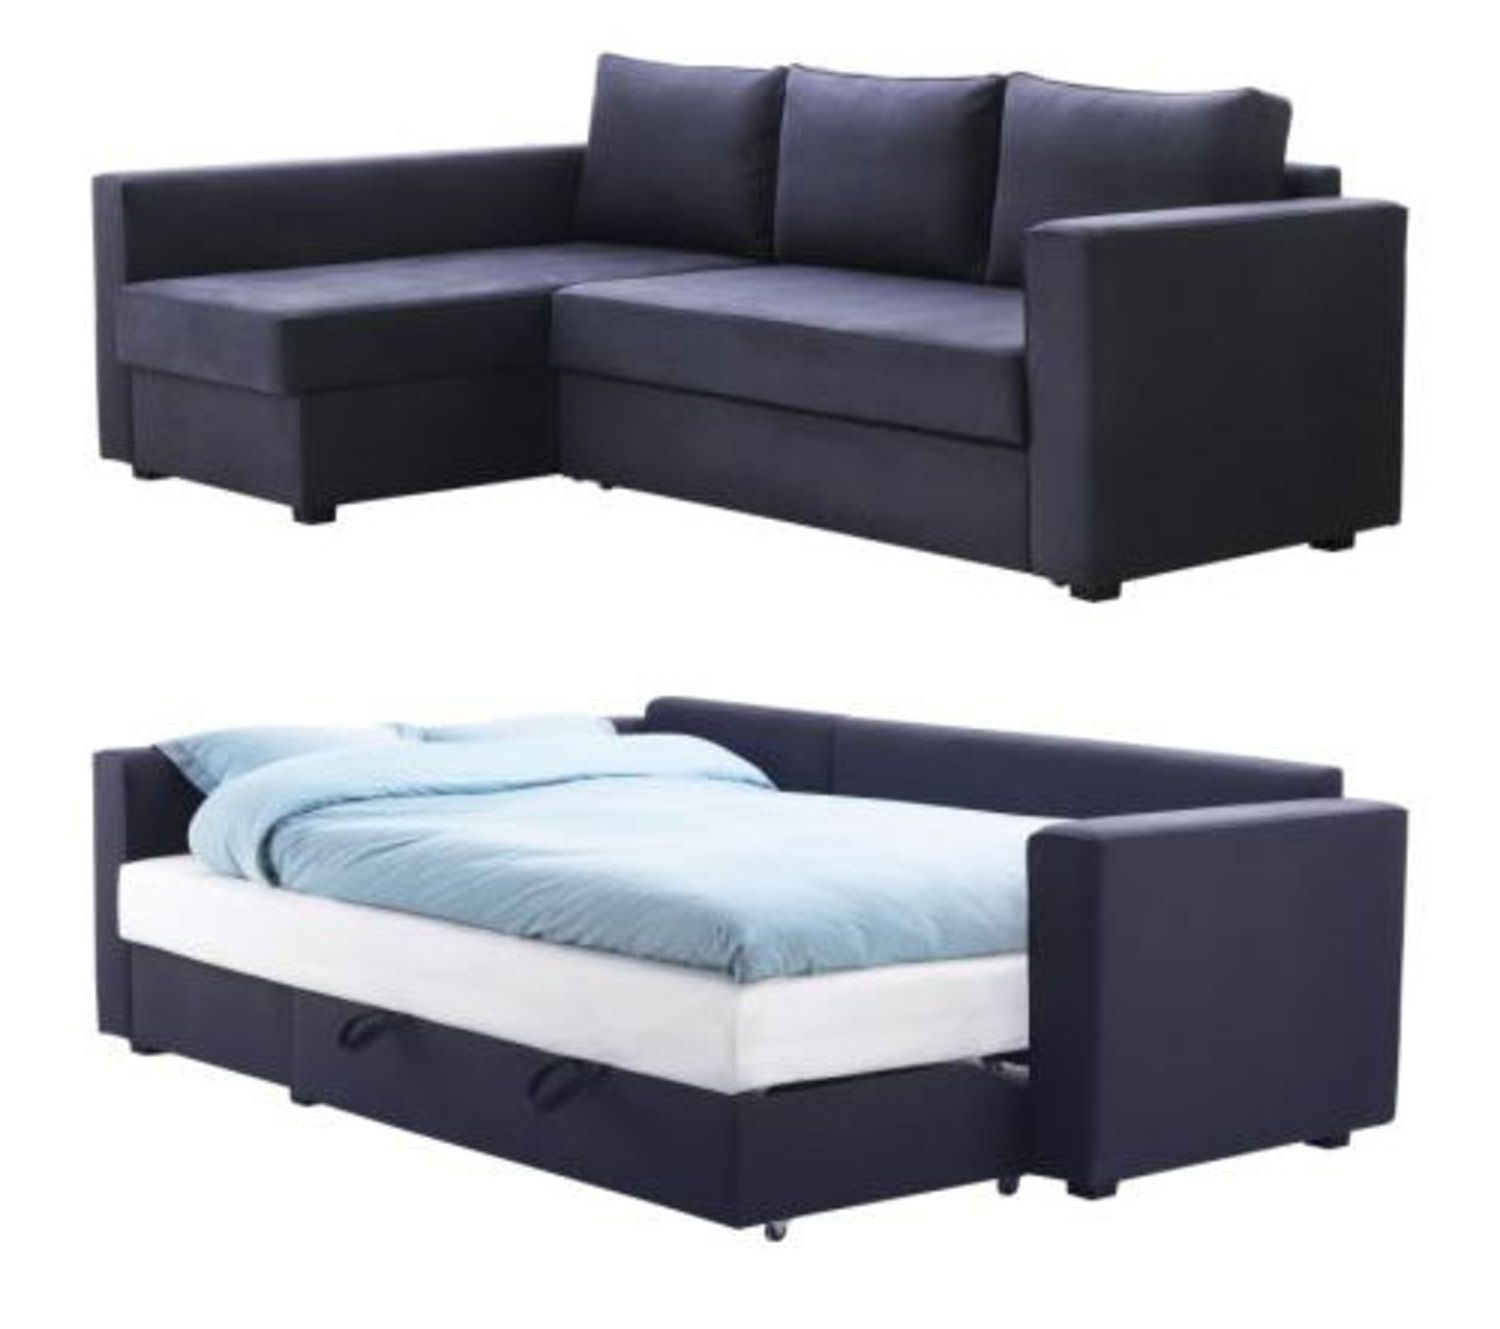 Favorite Sectional Sofas At Ikea Pertaining To Sofa : Pull Out Bed Sofas Sofa Beds Pull Out Sofa Beds Ikea (View 11 of 20)